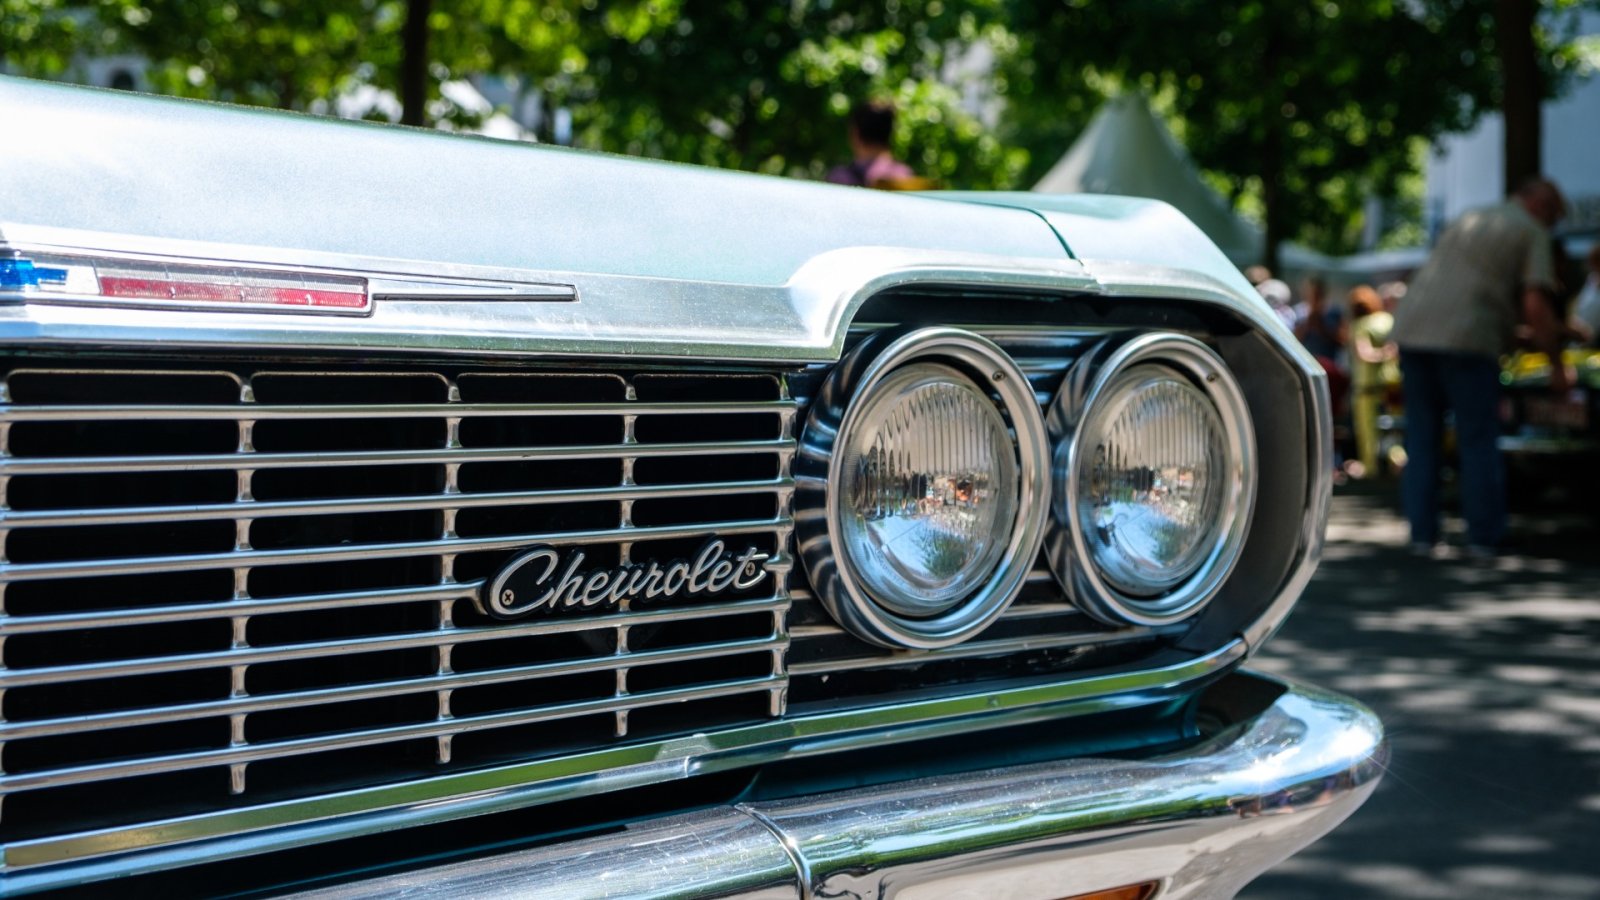 John C. Reilly: the 1968 Chevrolet Chevelle Malibu convertible up for auction